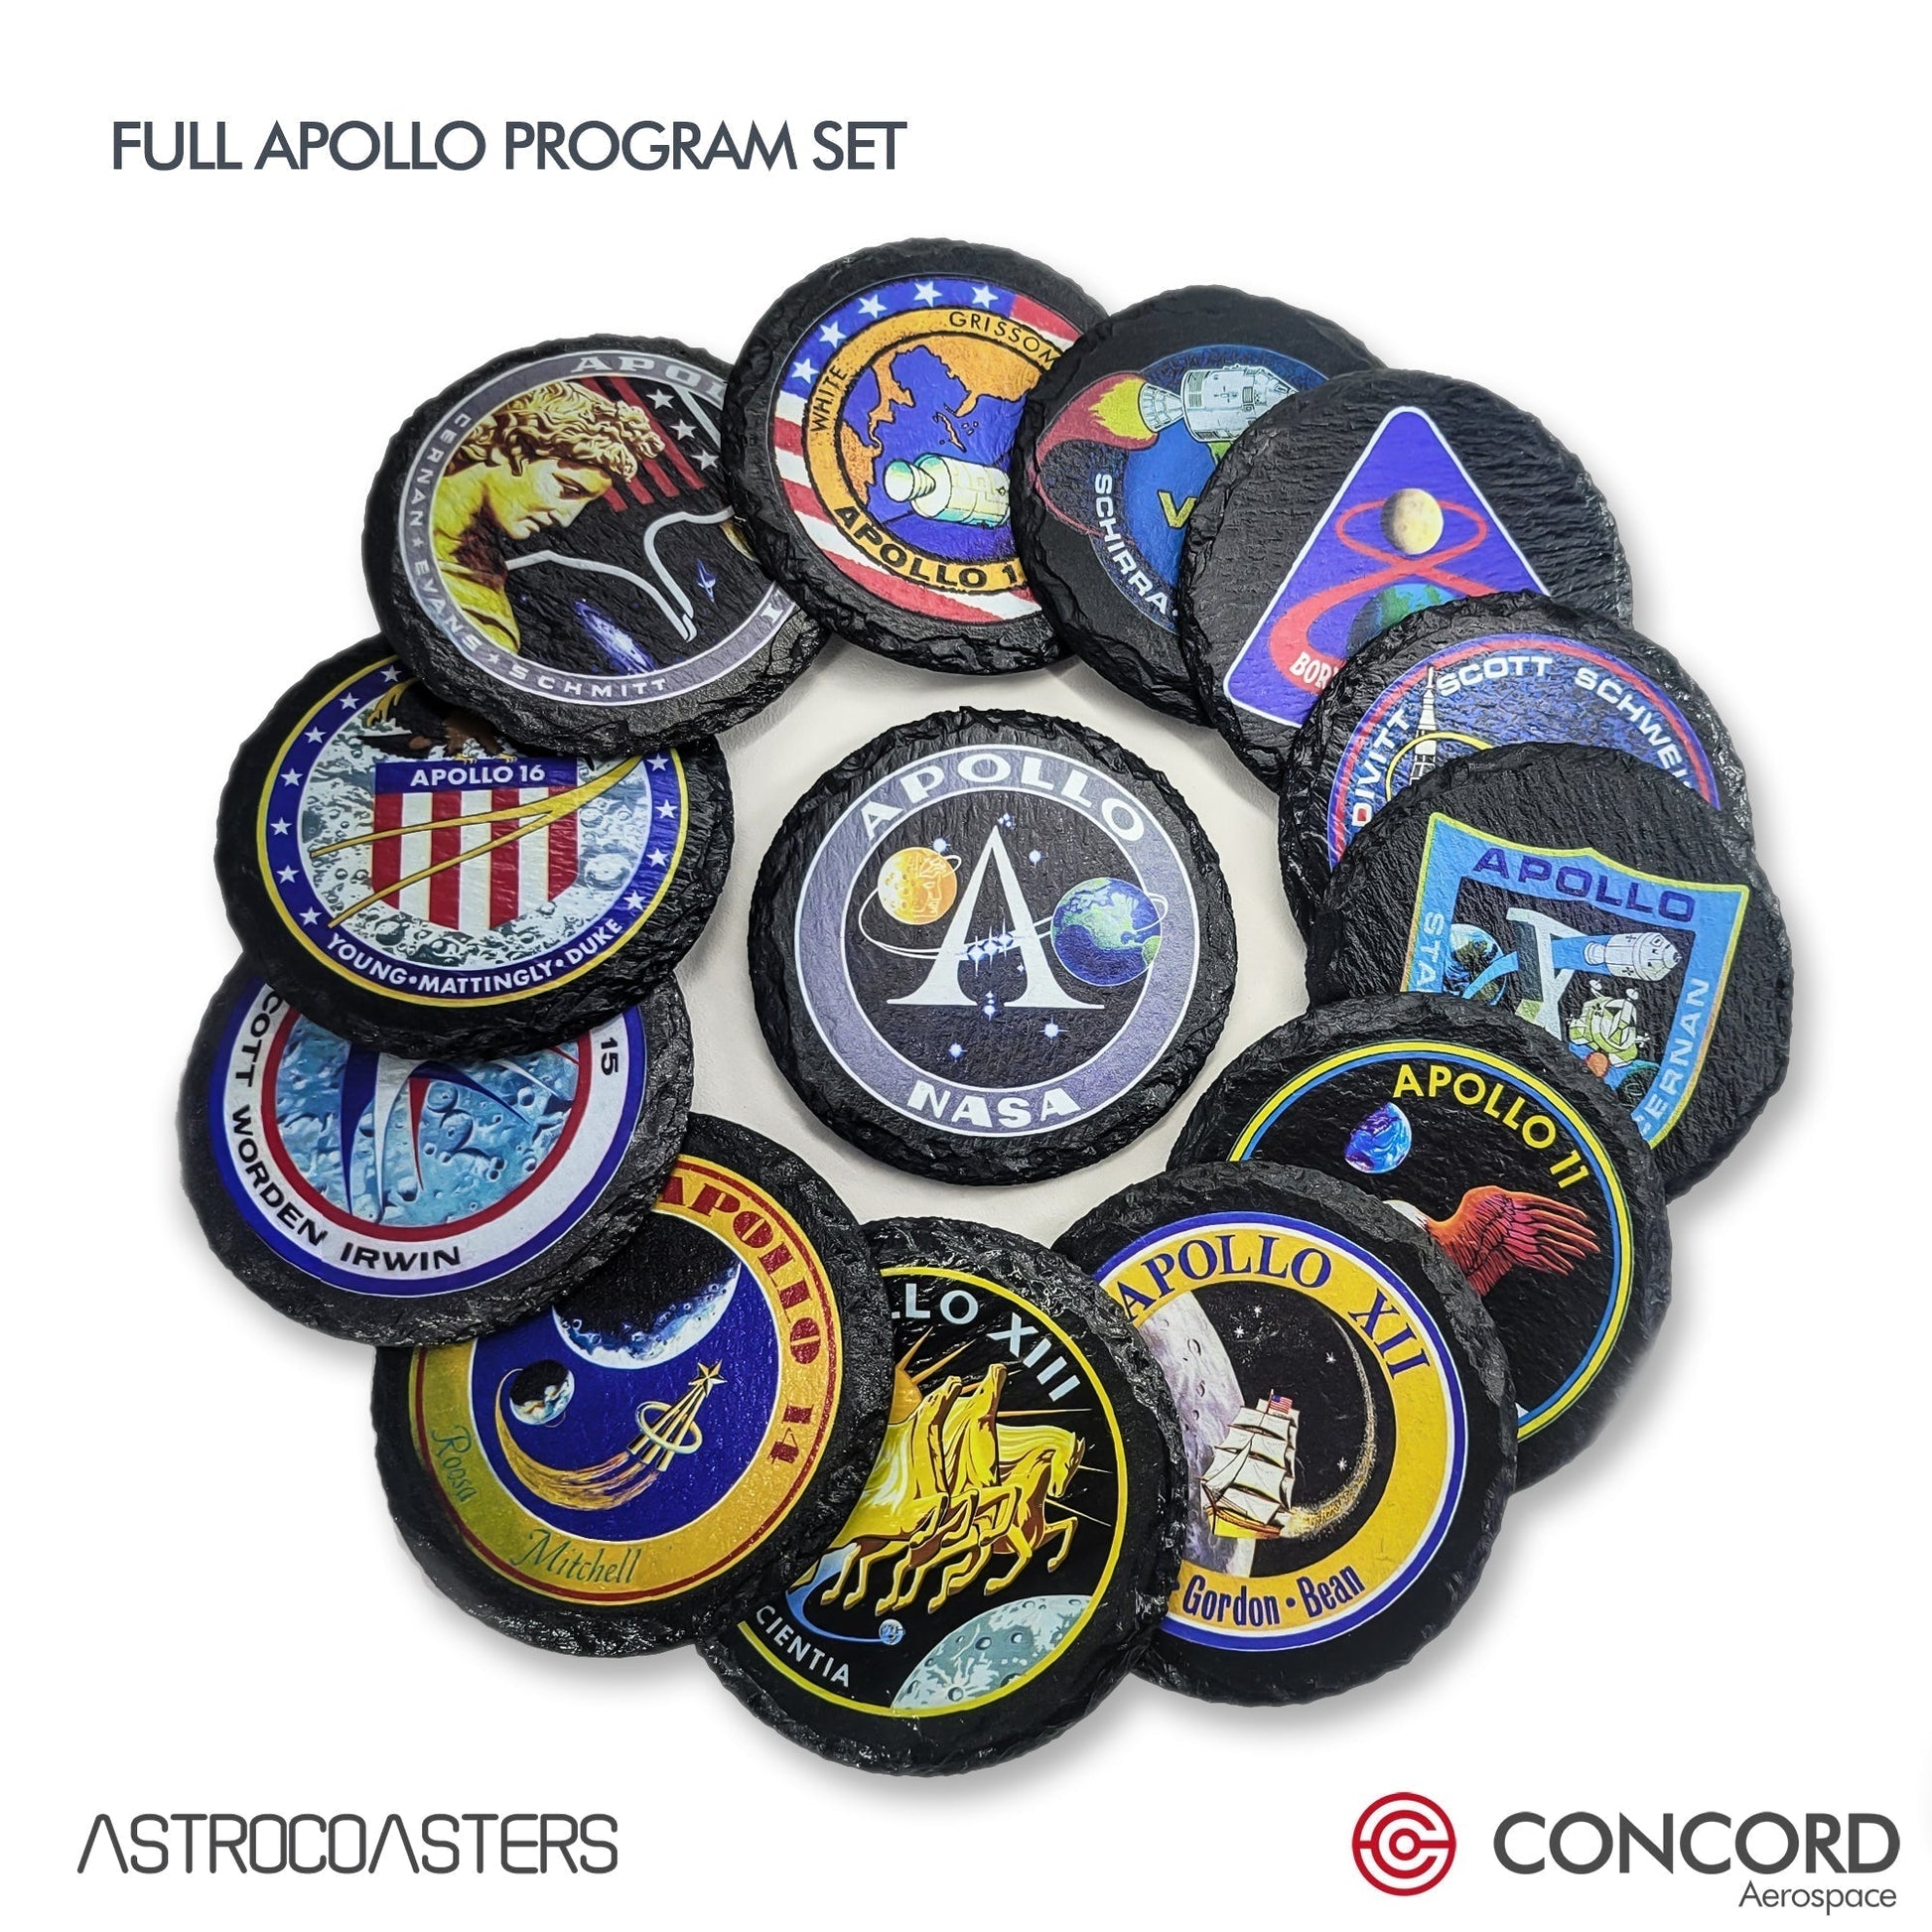 STS - 4 SPACE SHUTTLE - SLATE COASTER - Concord Aerospace Concord Aerospace Concord Aerospace Coasters